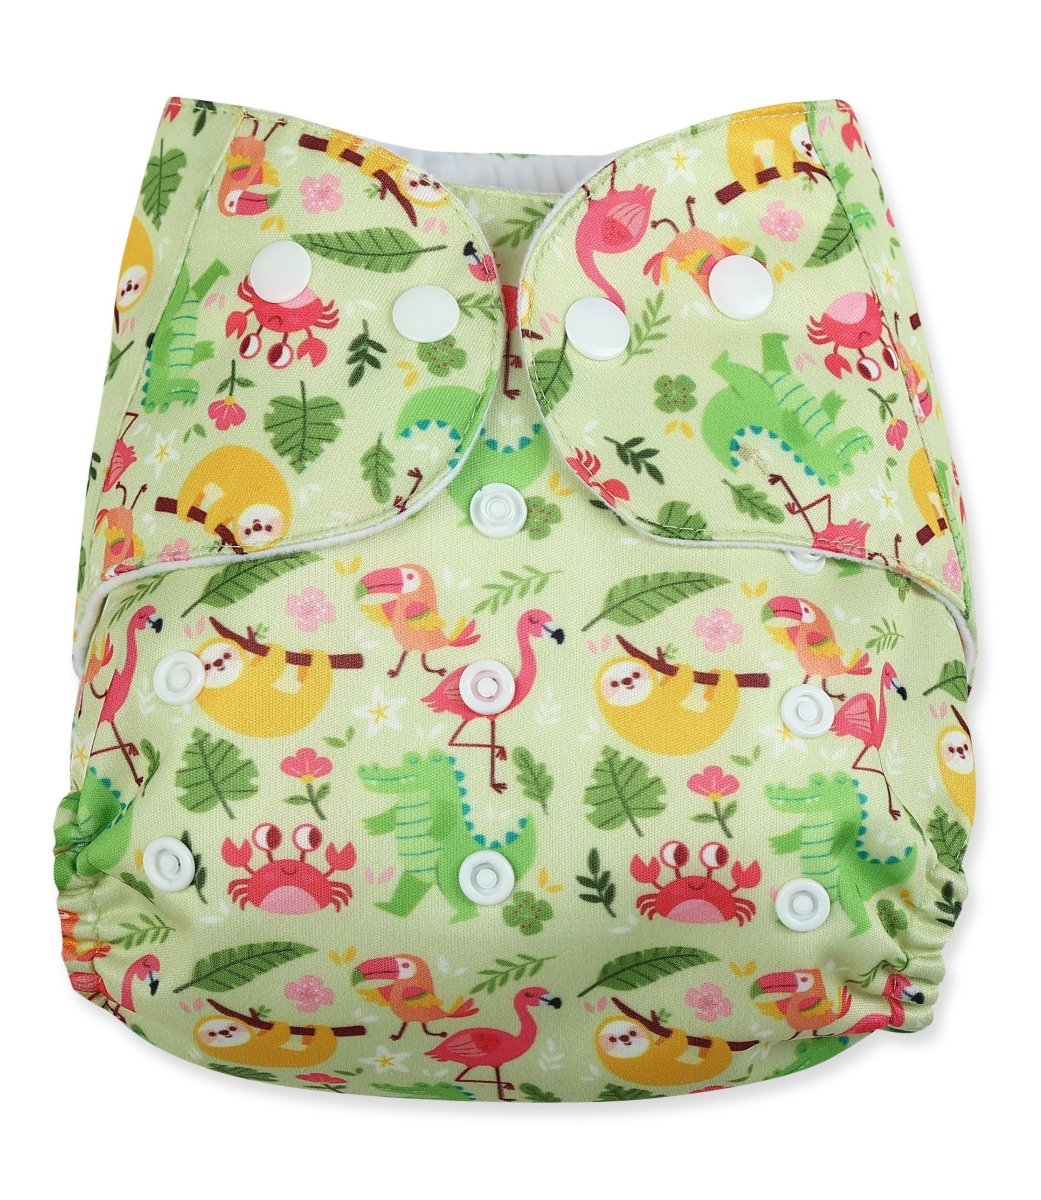 Combo of 3 Reusable Diapers- Option 11 - DPR-3-TPBS-3-3